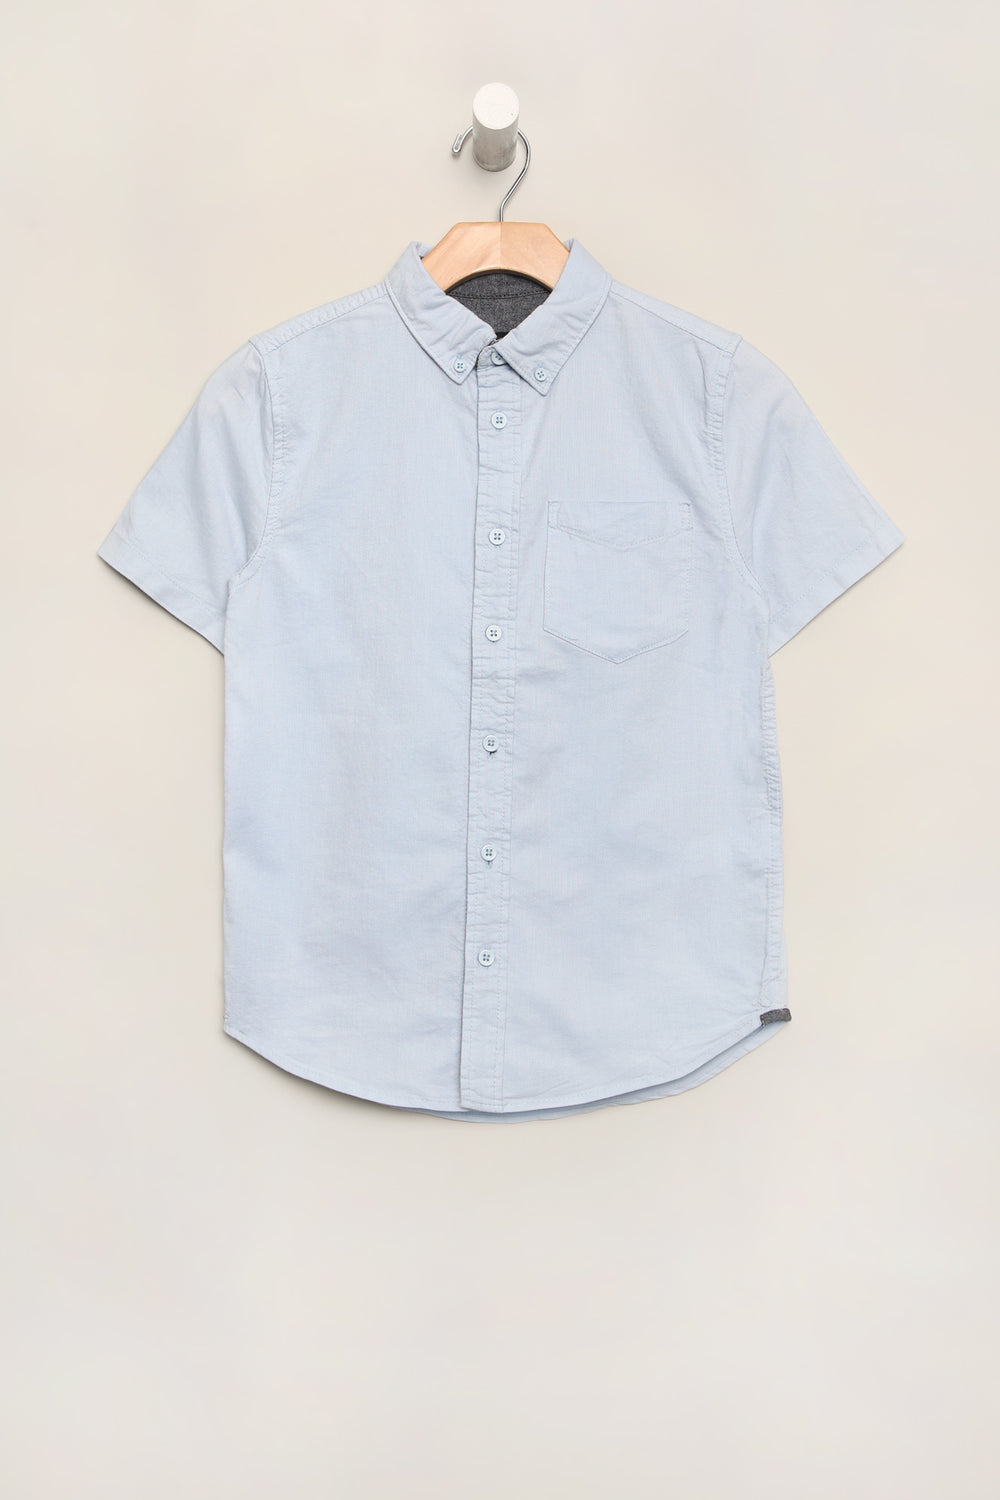 West49 Youth Oxford Button-Up West49 Youth Oxford Button-Up